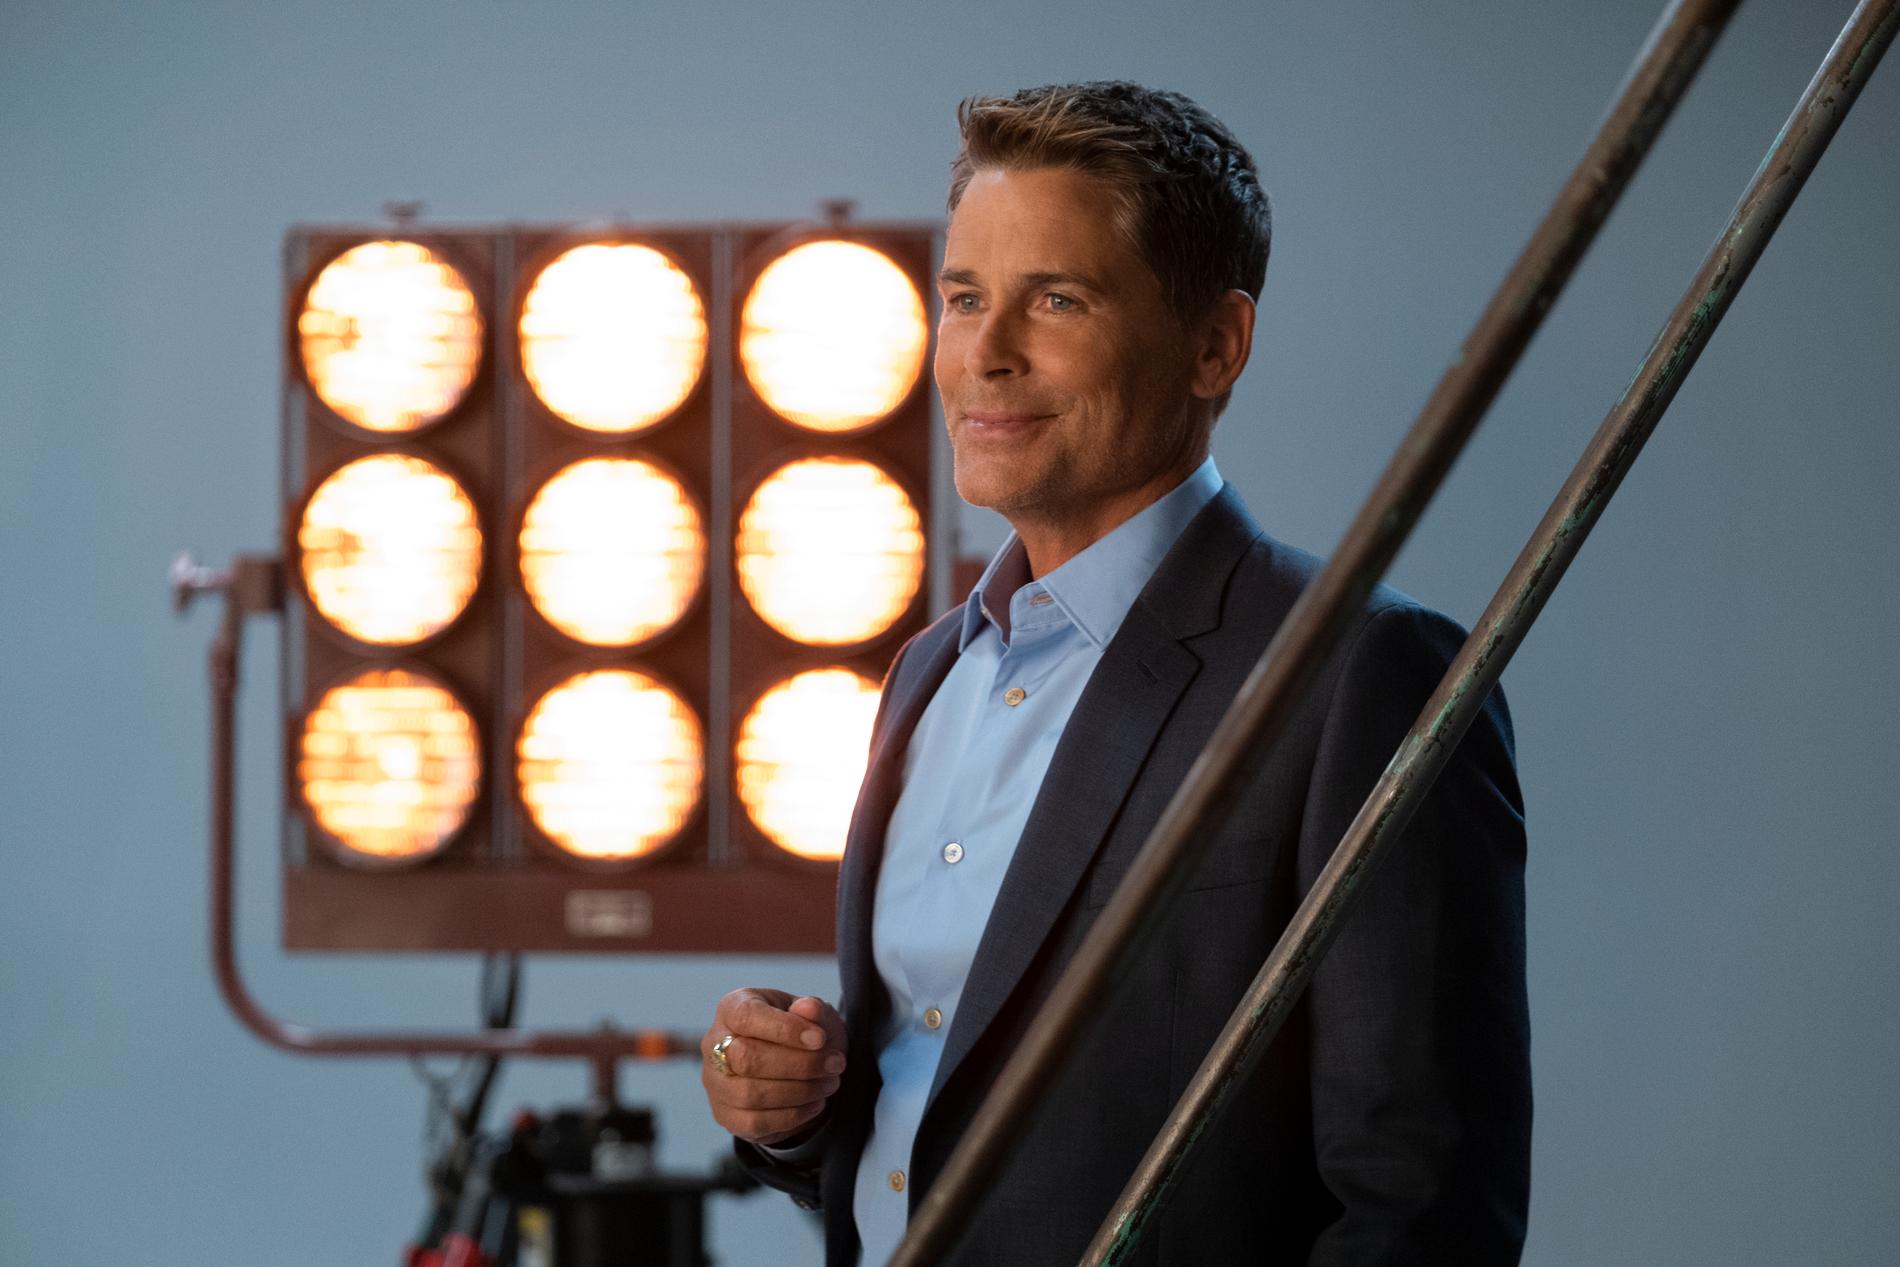 ”Attack of the Hollywood Clichés!” med Rob Lowe.